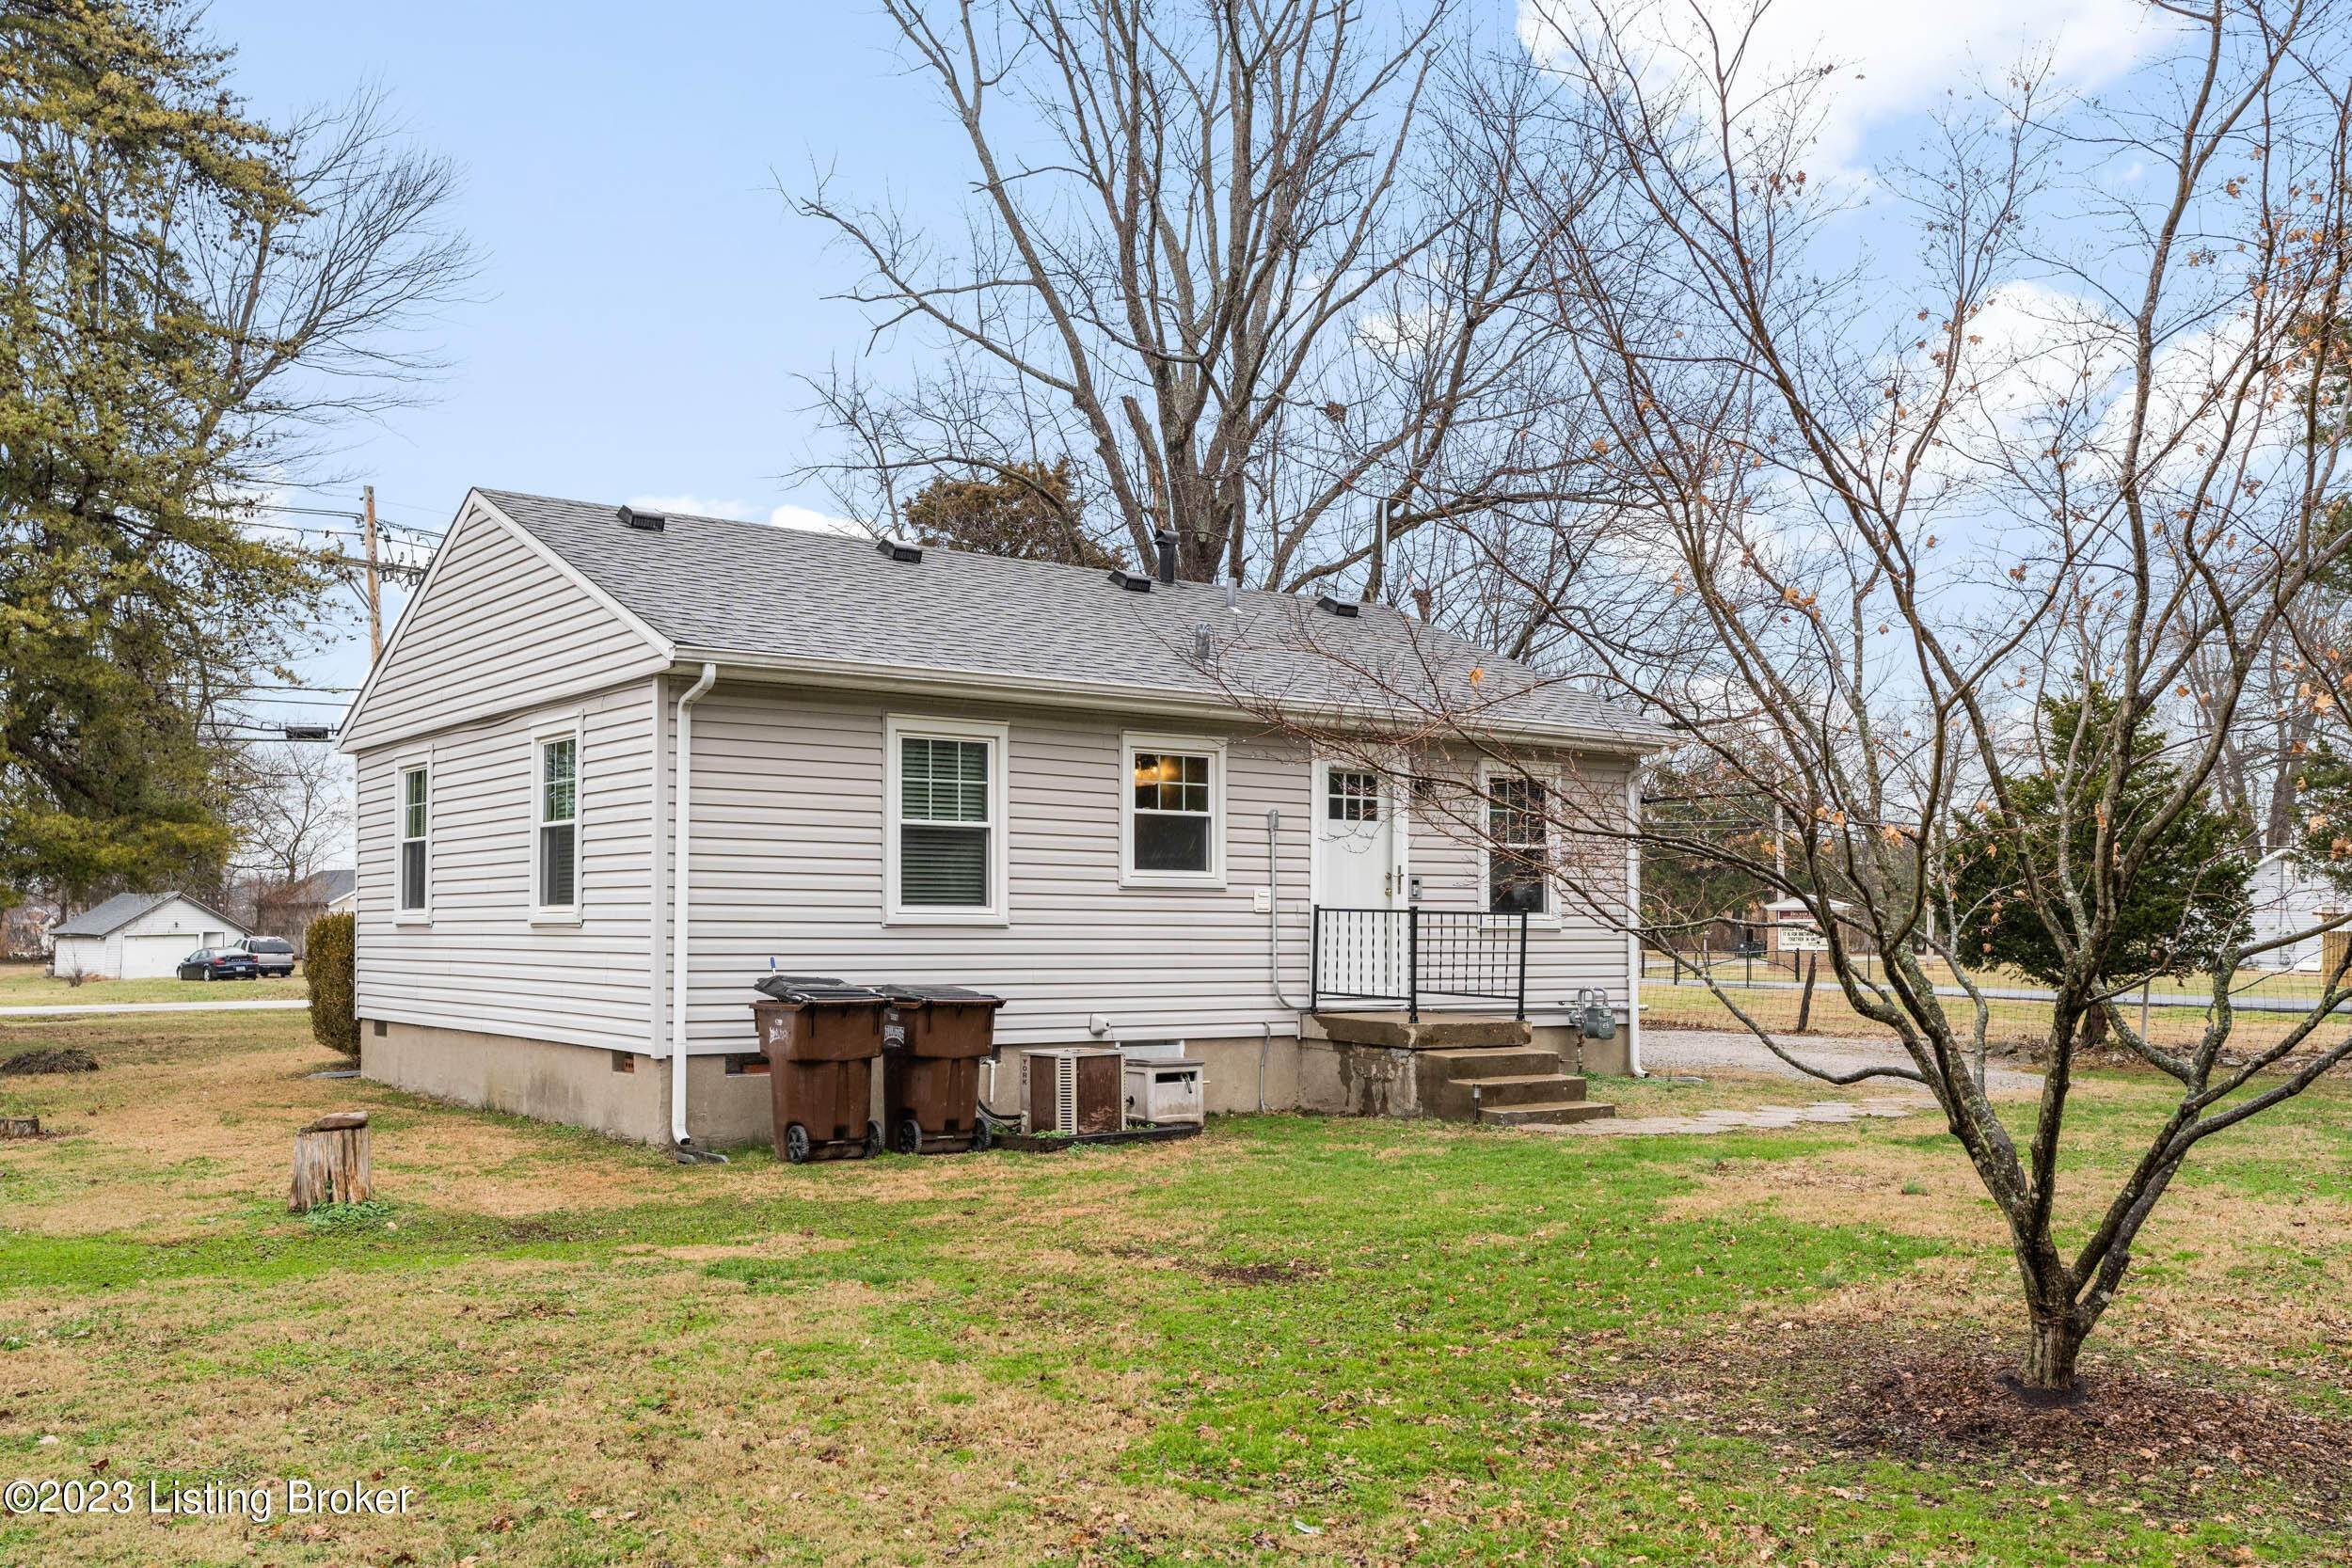 30. Single Family at Louisville, KY 40291